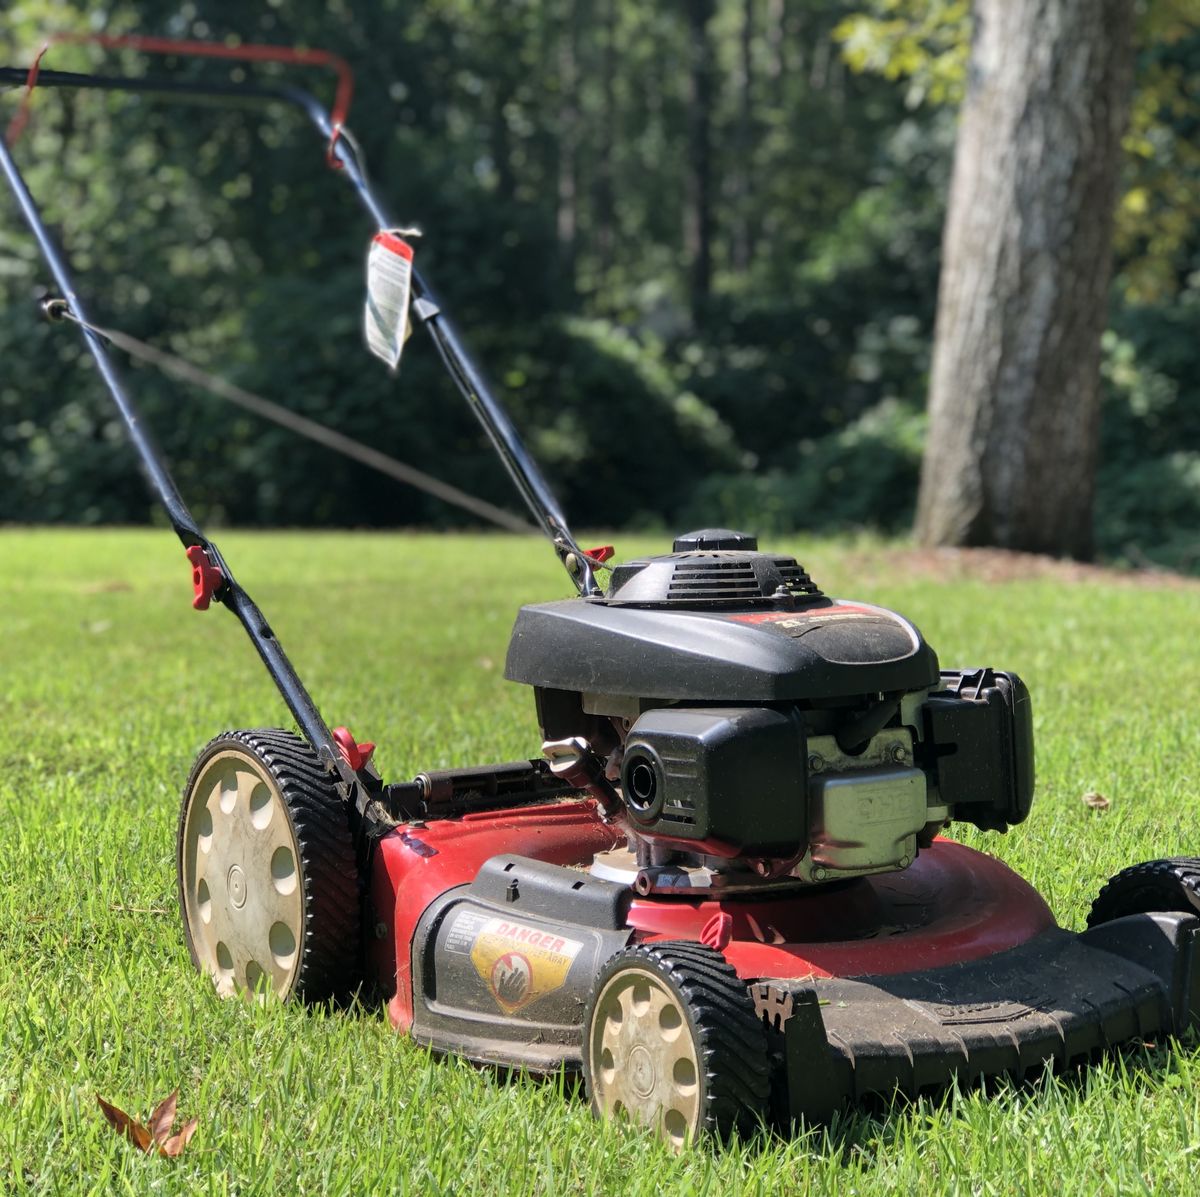 How To Winterize Your Lawn Mower and Power Equipment - Minnesota